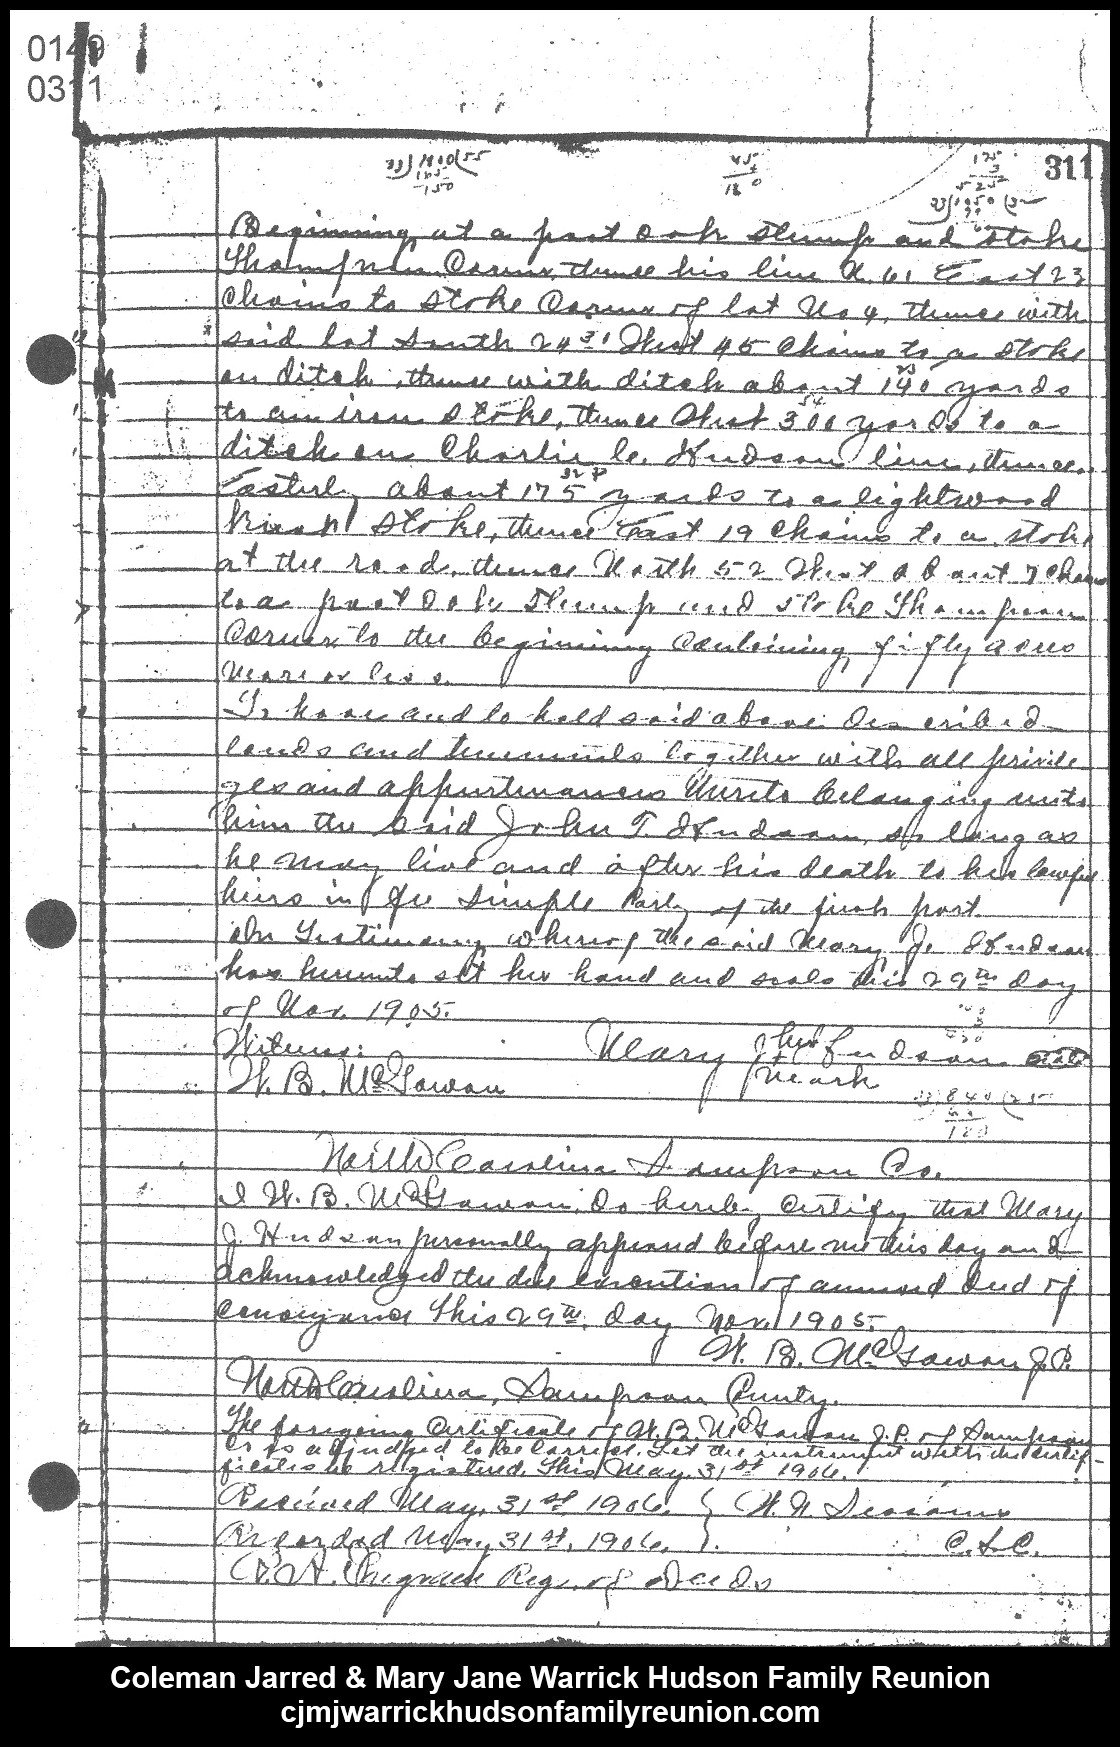 1906, 5-31a - Deed -MJ to John T. Hudson (page 2 of 2)